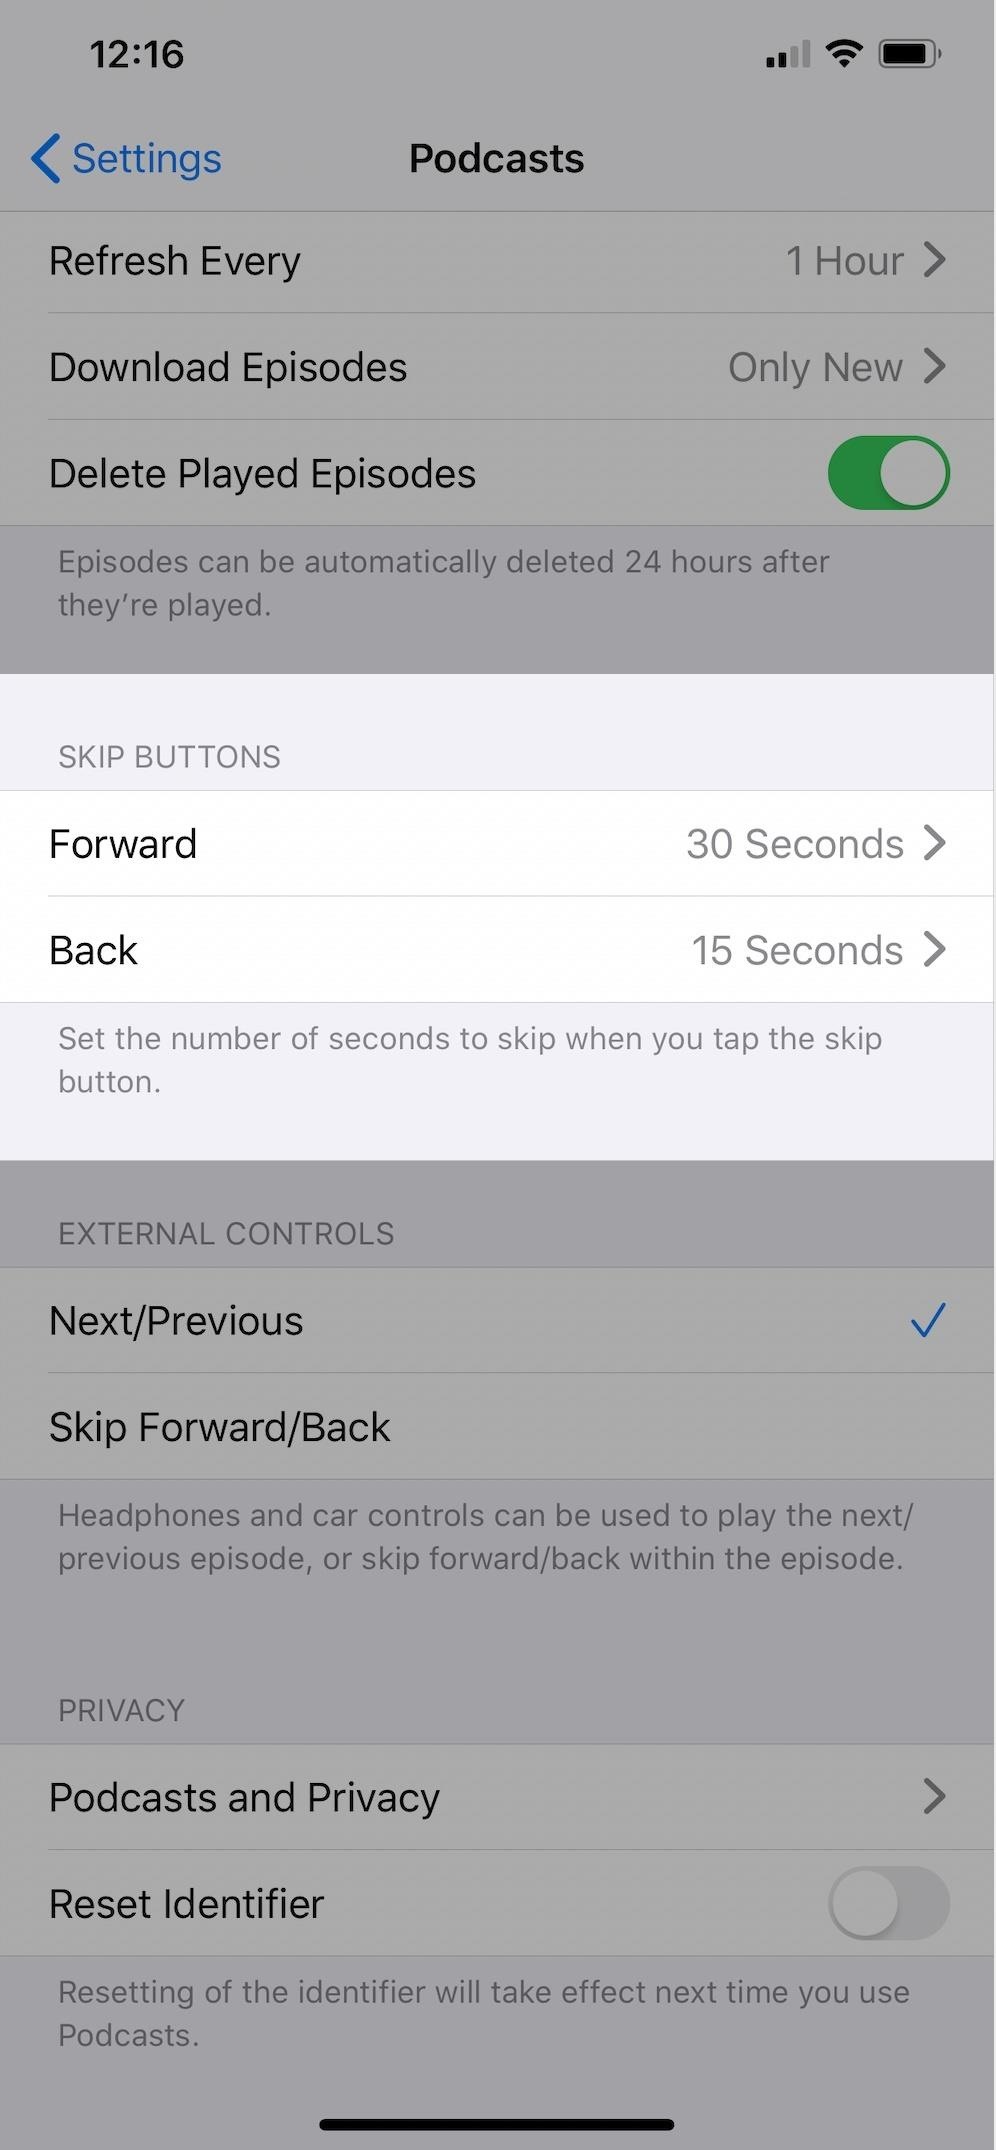 How to Customize the Back & Forward Skip Button Lengths in Apple Podcasts from 10 to 60 Seconds